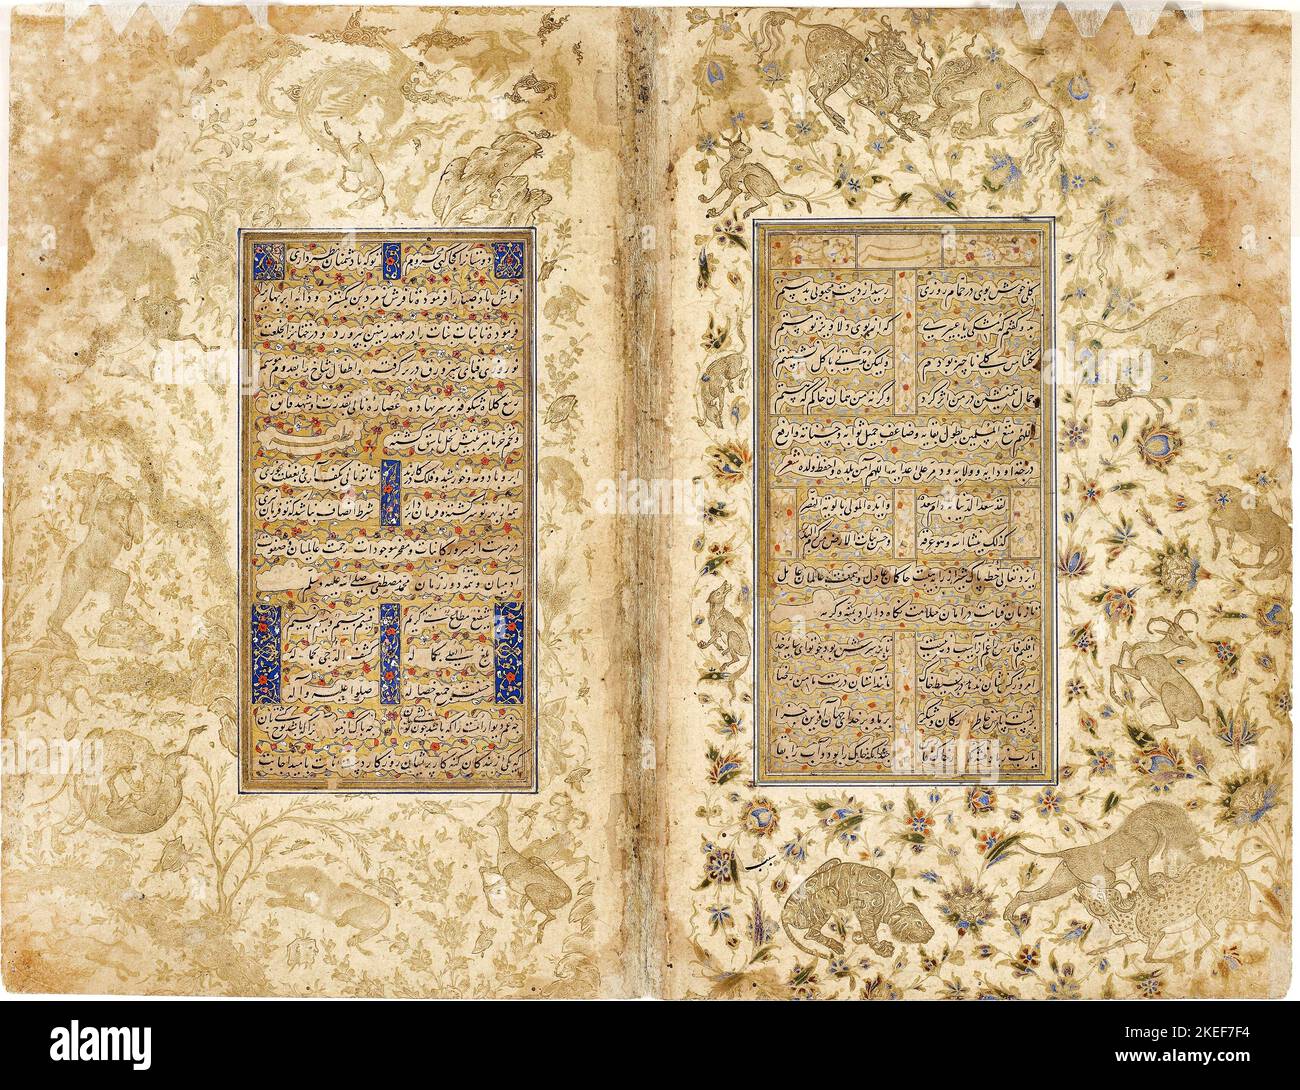 Aqa Mirak, Detached Folio from a Gulistan Rose Garden by Sa’di, 1468 to first half of the 16th century, Freer Gallery of Art, Washington, D.C., USA. Stock Photo